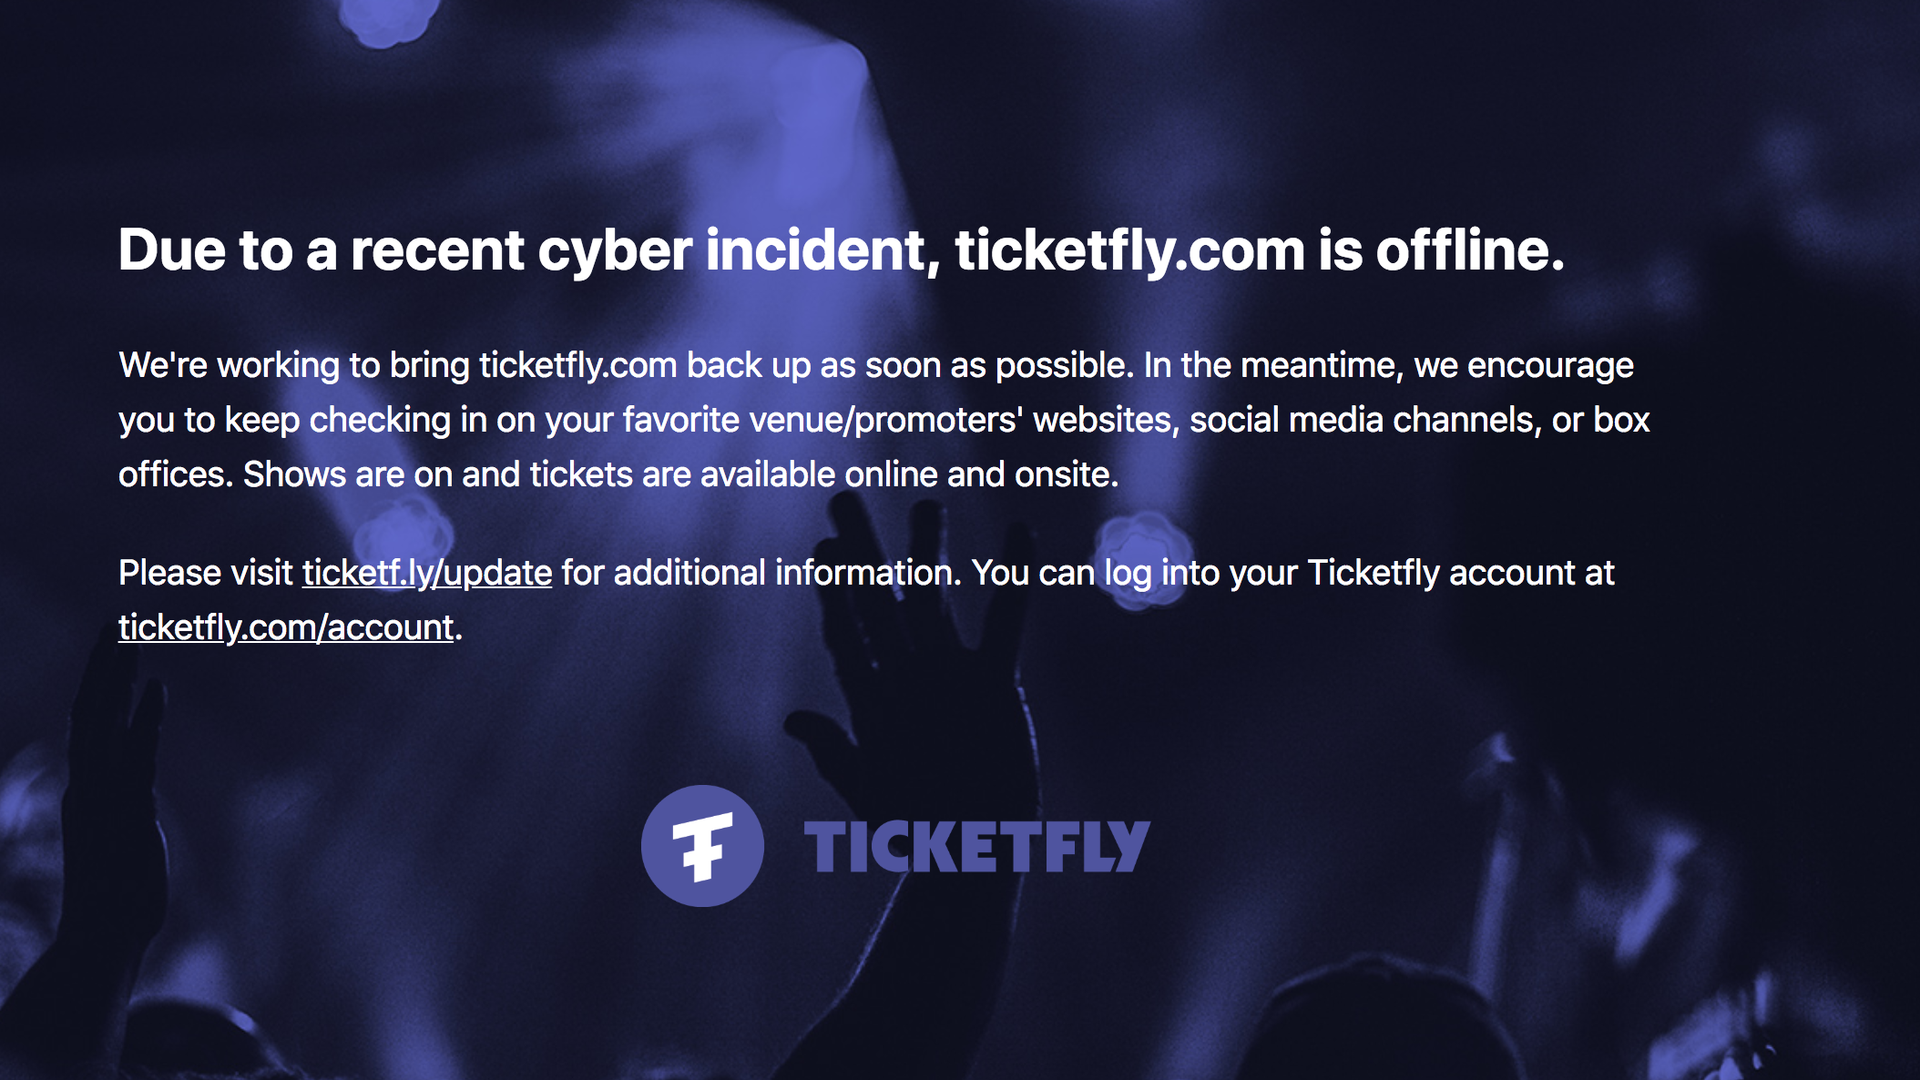 Home page for ticketfly.com reporting the site is down.